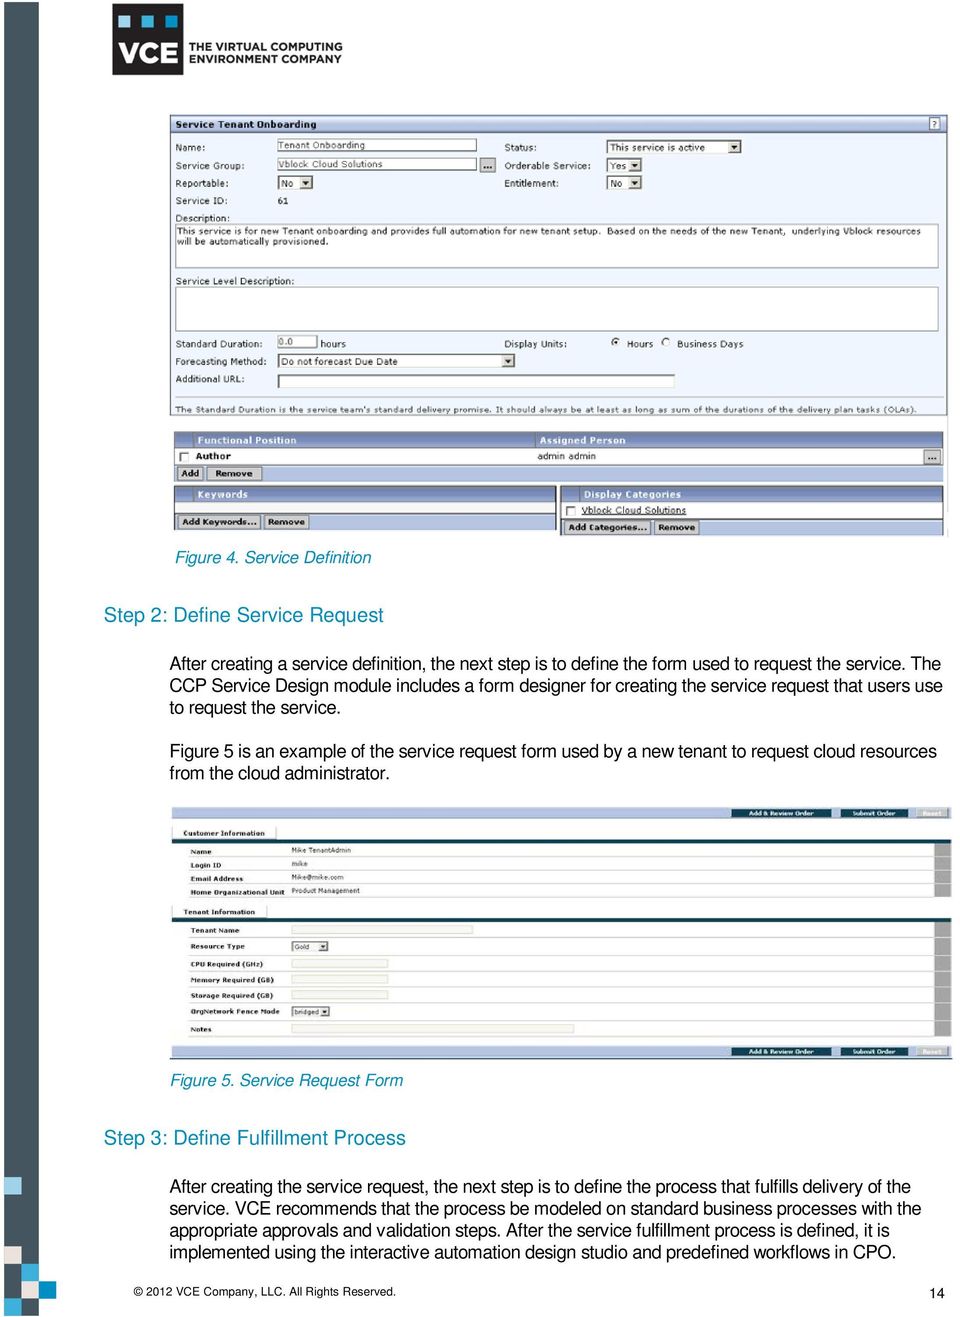 Figure 5 is an example of the service request form used by a new tenant to request cloud resources from the cloud administrator. Figure 5.